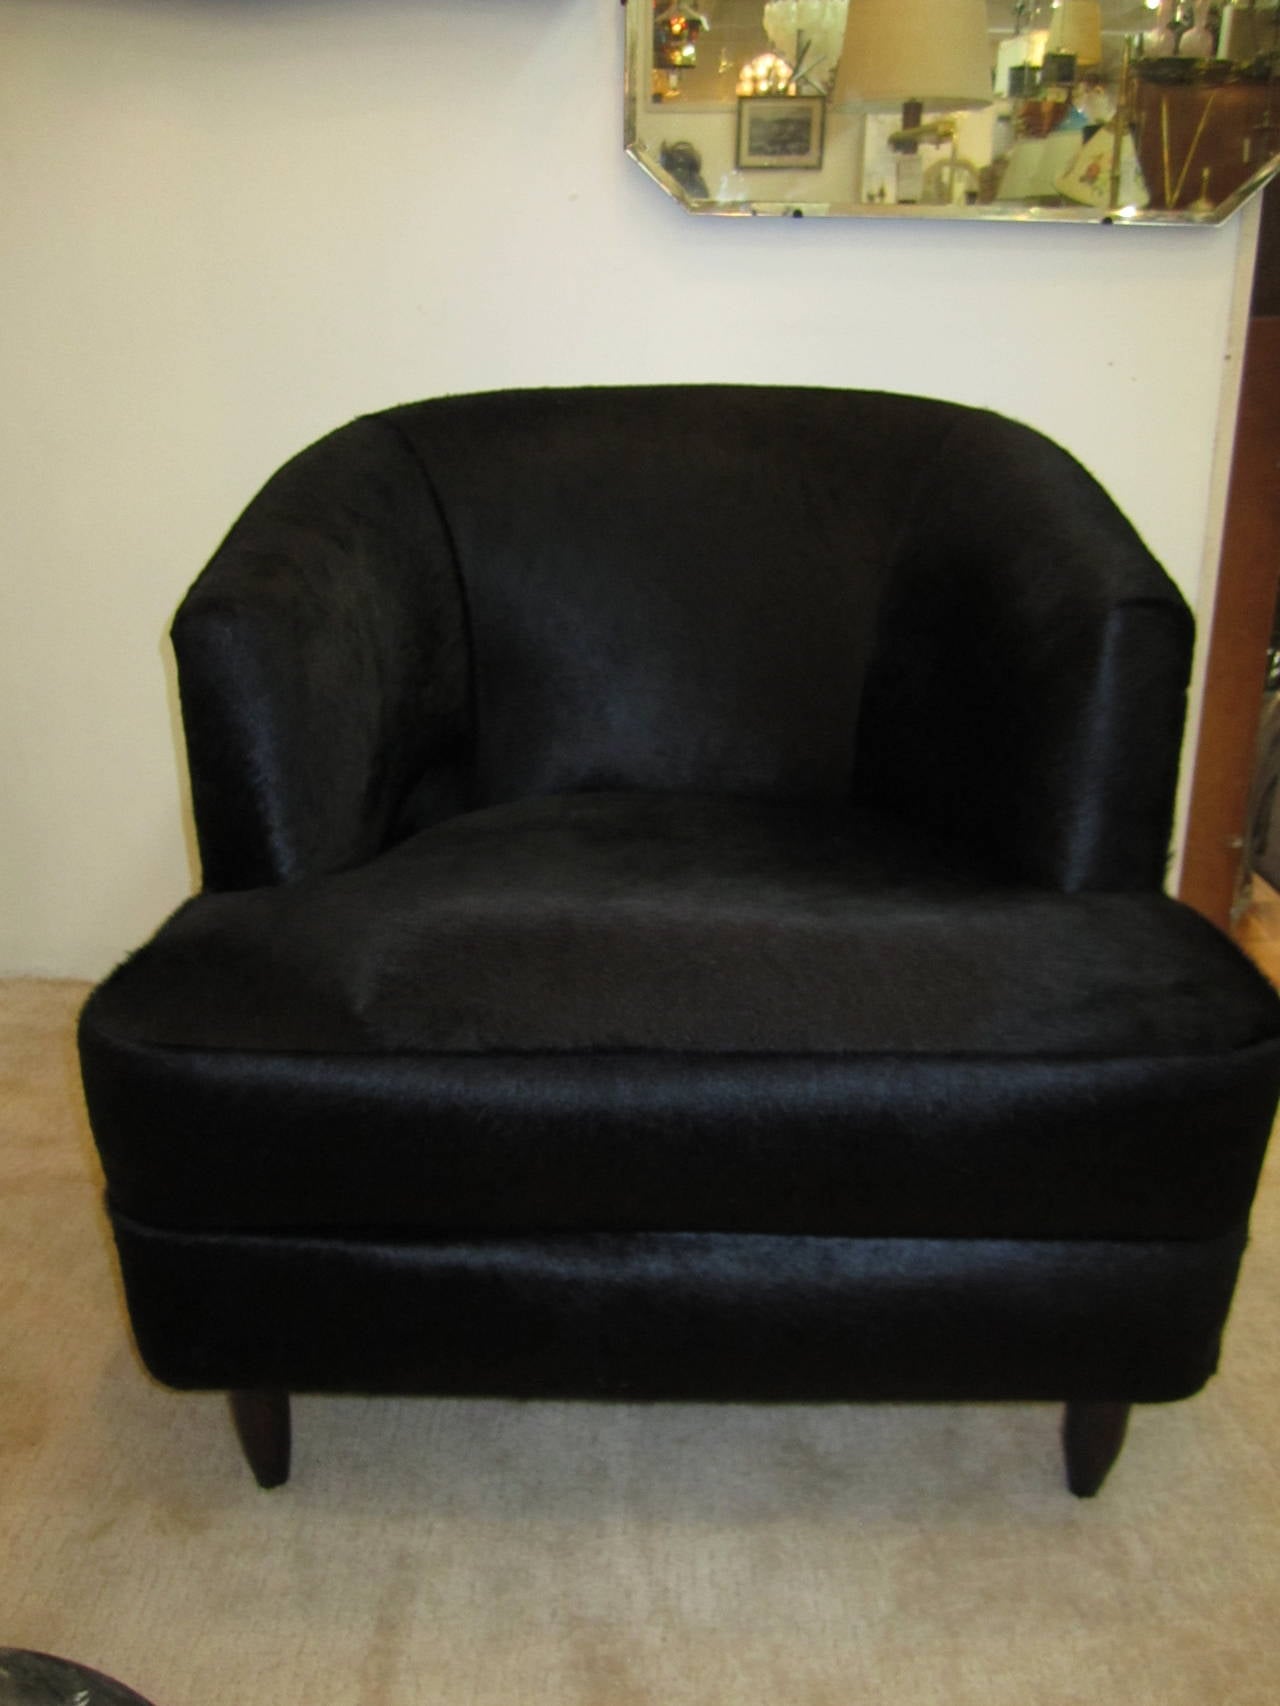 Stunning custom upholstered club or corner chair in black hide. Entire chair is upholstered in authentic black hide. Very luxurious, gorgeous. Item available here online. By request, item can be made available by appointment to the Trade (in New